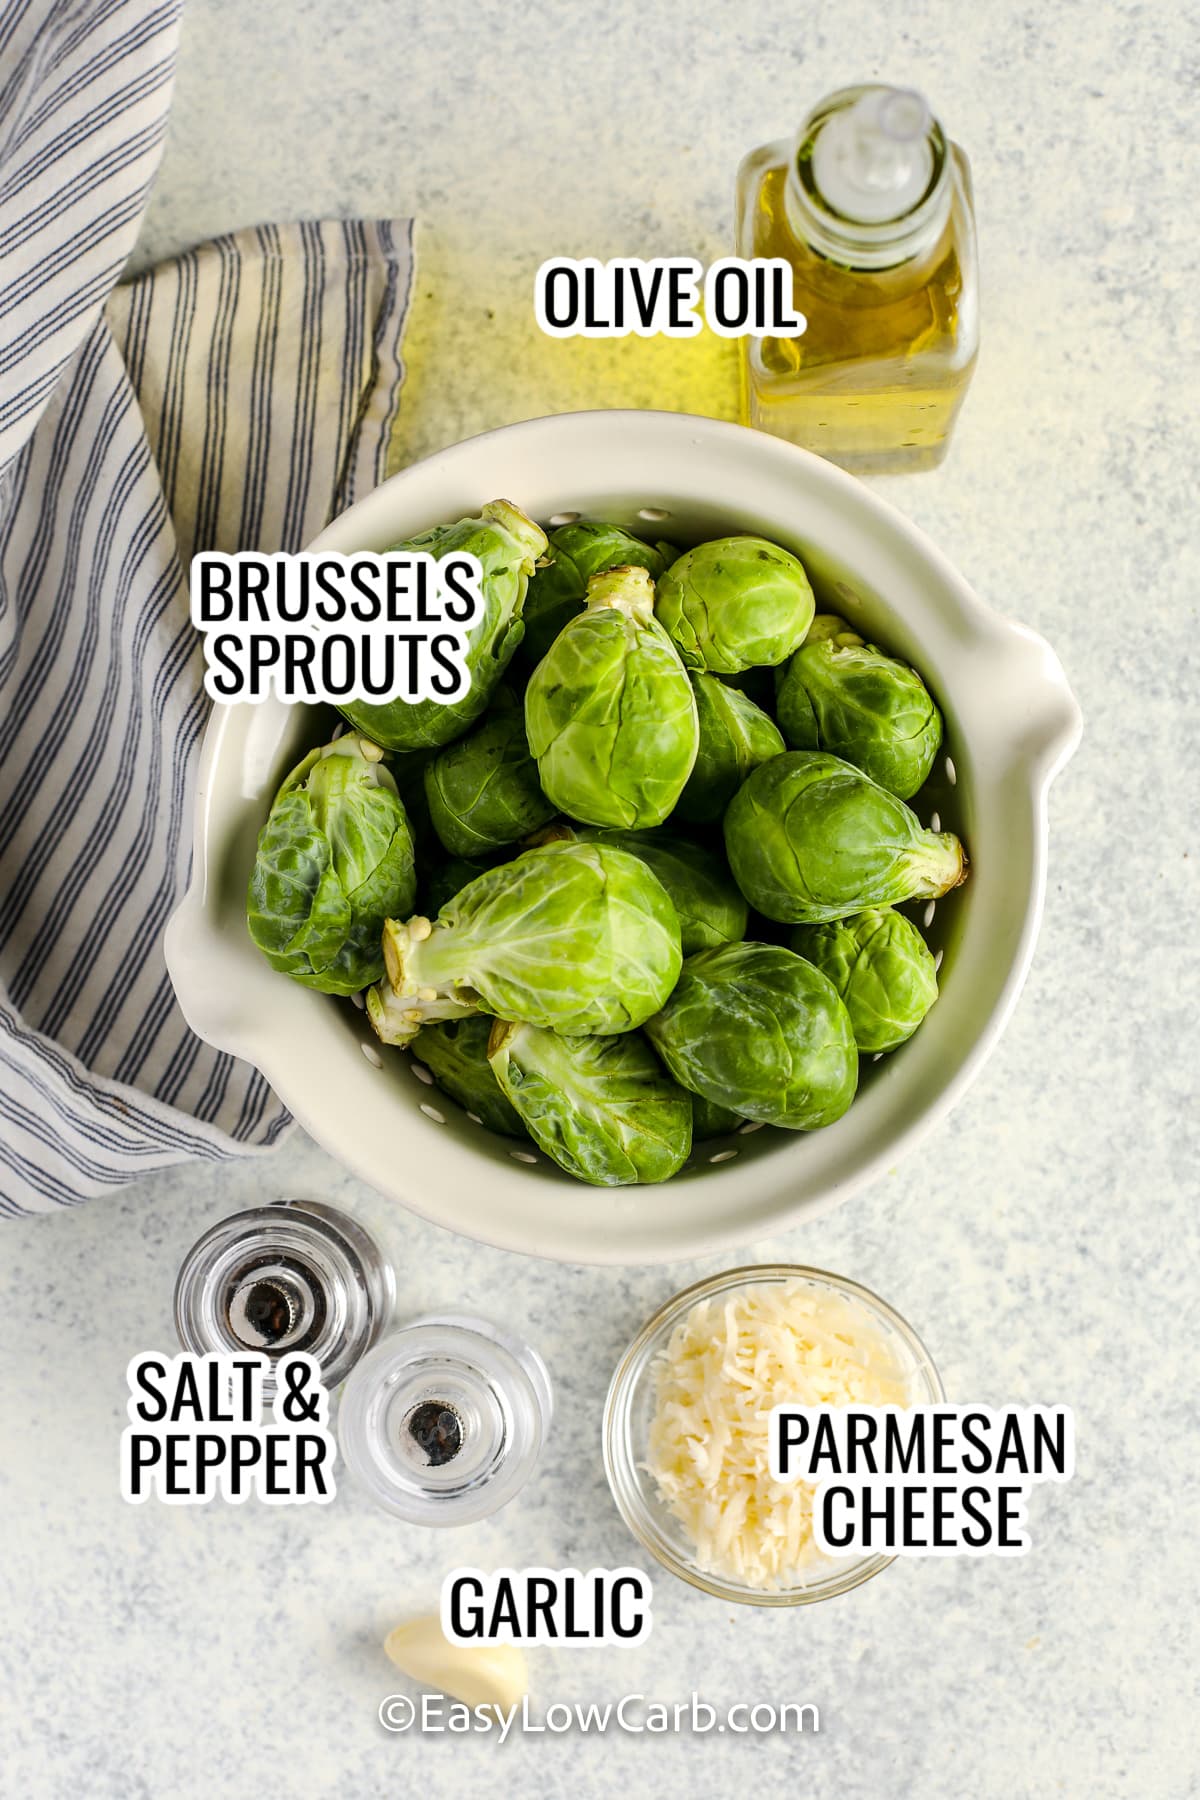 ingredients assembled to make grilled brussels sprouts, including brussels sprouts, olive oil, salt and pepper, garlic, and parmesan cheese